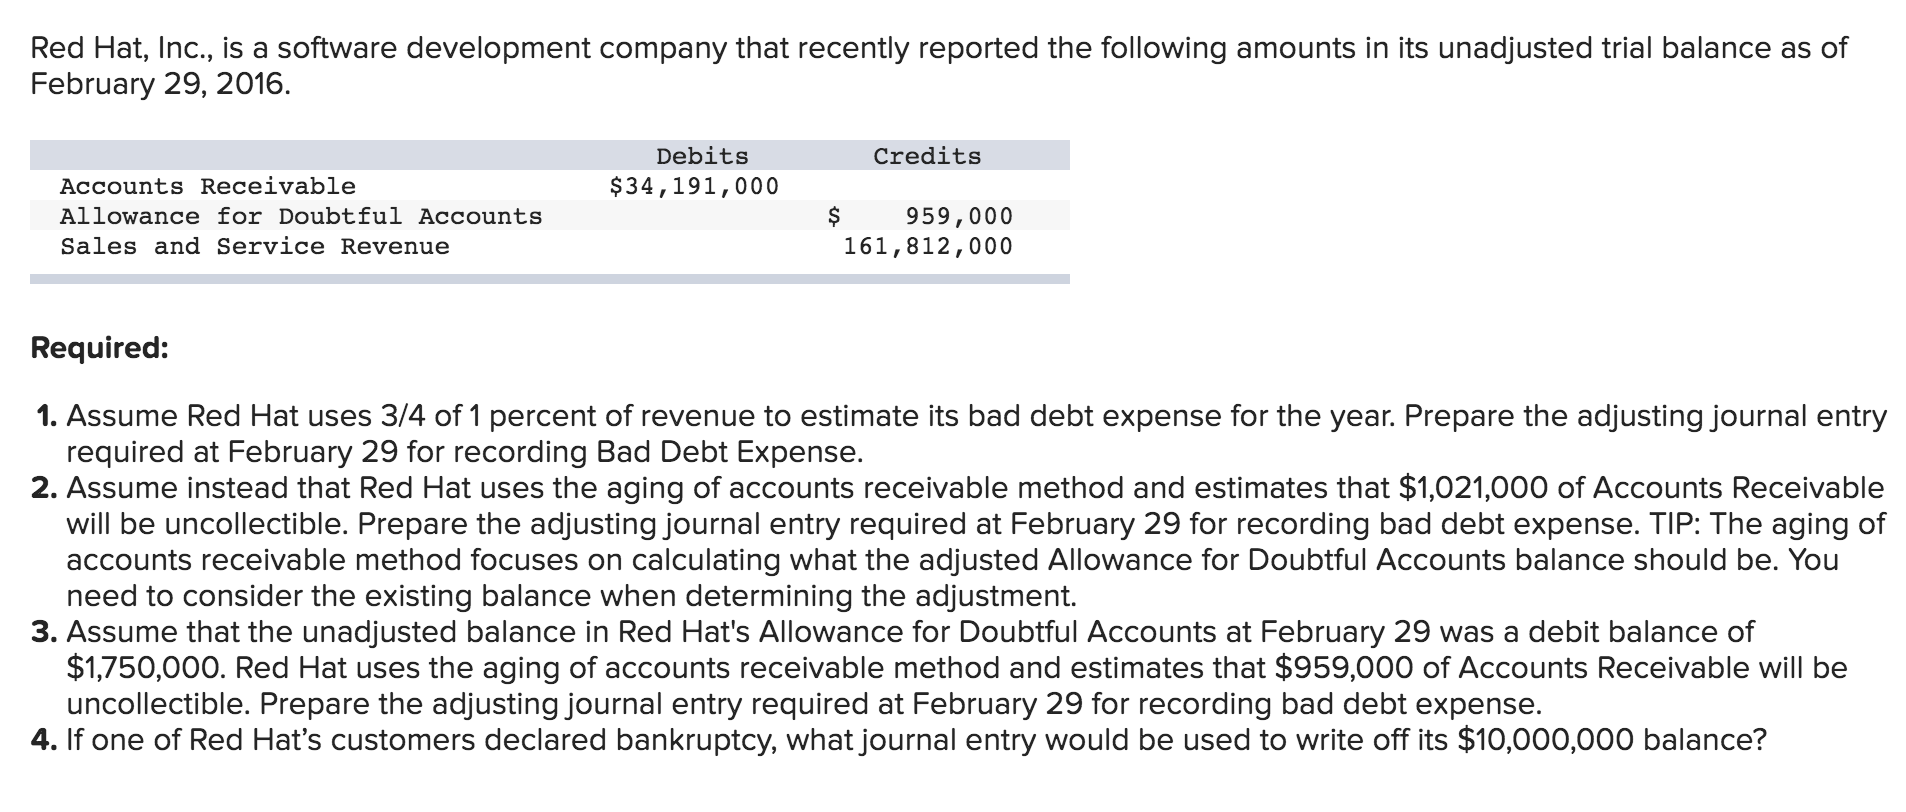 Red Hat, Inc., is a software development company that recently reported the following amounts in its unadjusted trial balance as of
February 29, 2016.
Debits
Credits
Accounts Receivable
$34,191,000
959,000
161,812,000
Allowance for Doubtful Accounts
Sales and Service Revenue
Required:
1. Assume Red Hat uses 3/4 of 1 percent of revenue to estimate its bad debt expense for the year. Prepare the adjusting journal entry
required at February 29 for recording Bad Debt Expense.
2. Assume instead that Red Hat uses the aging of accounts receivable method and estimates that $1,021,000 of Accounts Receivable
will be uncollectible. Prepare the adjusting journal entry required at February 29 for recording bad debt expense. TIP: The aging of
accounts receivable method focuses on calculating what the adjusted Allowance for Doubtful Accounts balance should be. You
need to consider the existing balance when determining the adjustment.
3. Assume that the unadjusted balance in Red Hat's Allowance for Doubtful Accounts at February 29 was a debit balance of
$1,750,000. Red Hat uses the aging of accounts receivable method and estimates that $959,000 of Accounts Receivable will be
uncollectible. Prepare the adjusting journal entry required at February 29 for recording bad debt expense.
4. If one of Red Hat's customers declared bankruptcy, what journal entry would be used to write off its $10,000,000 balance?
